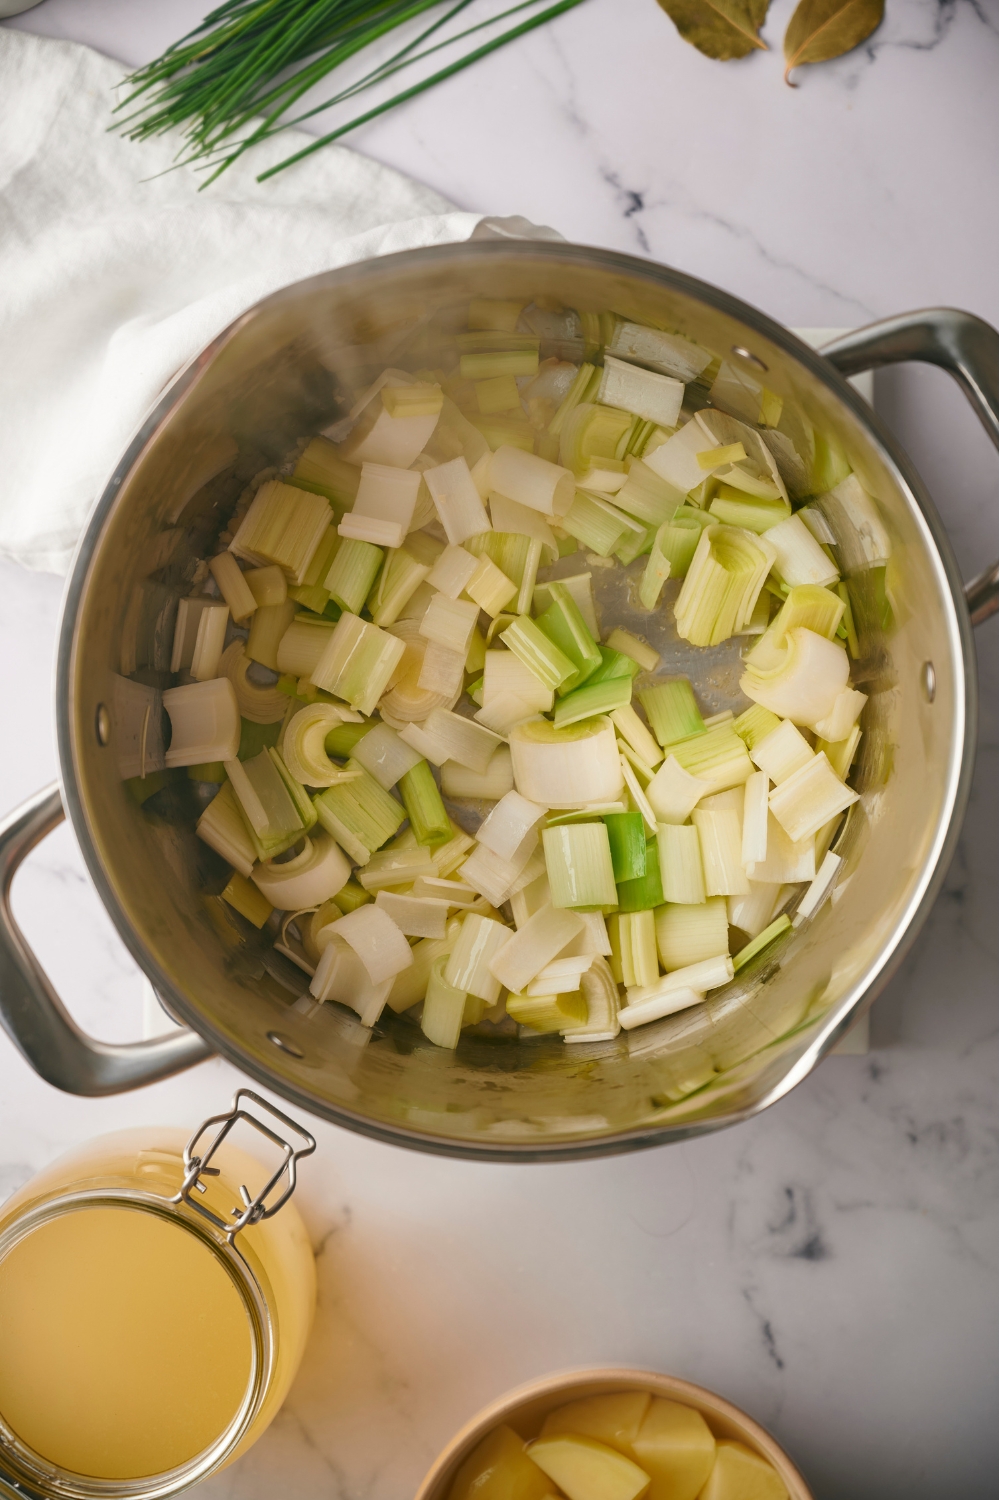 Chopped leeks cooking in a pot.